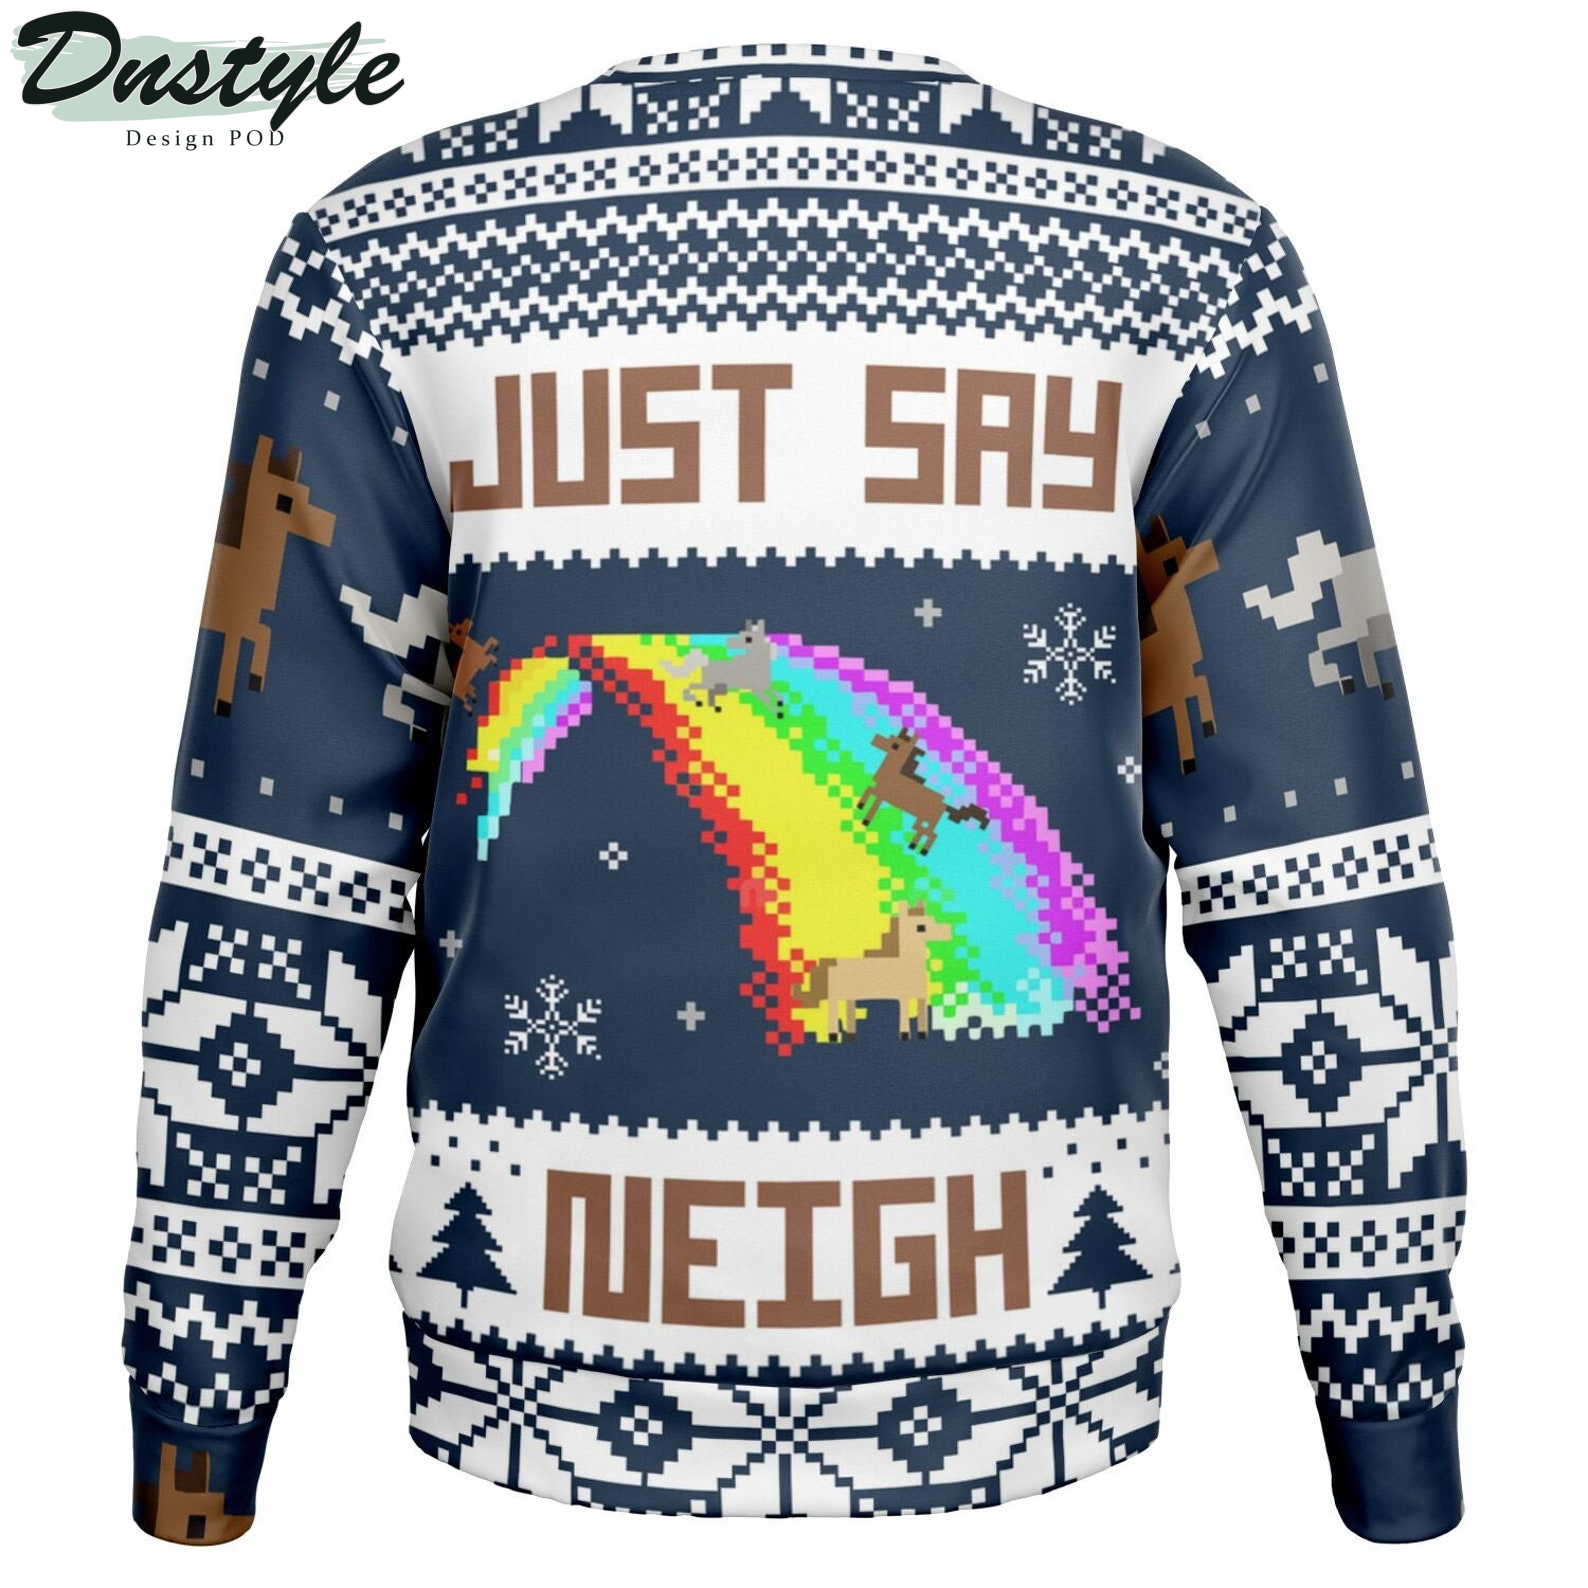 Just Say Neigh Ketamine 2022 Ugly Christmas Sweater